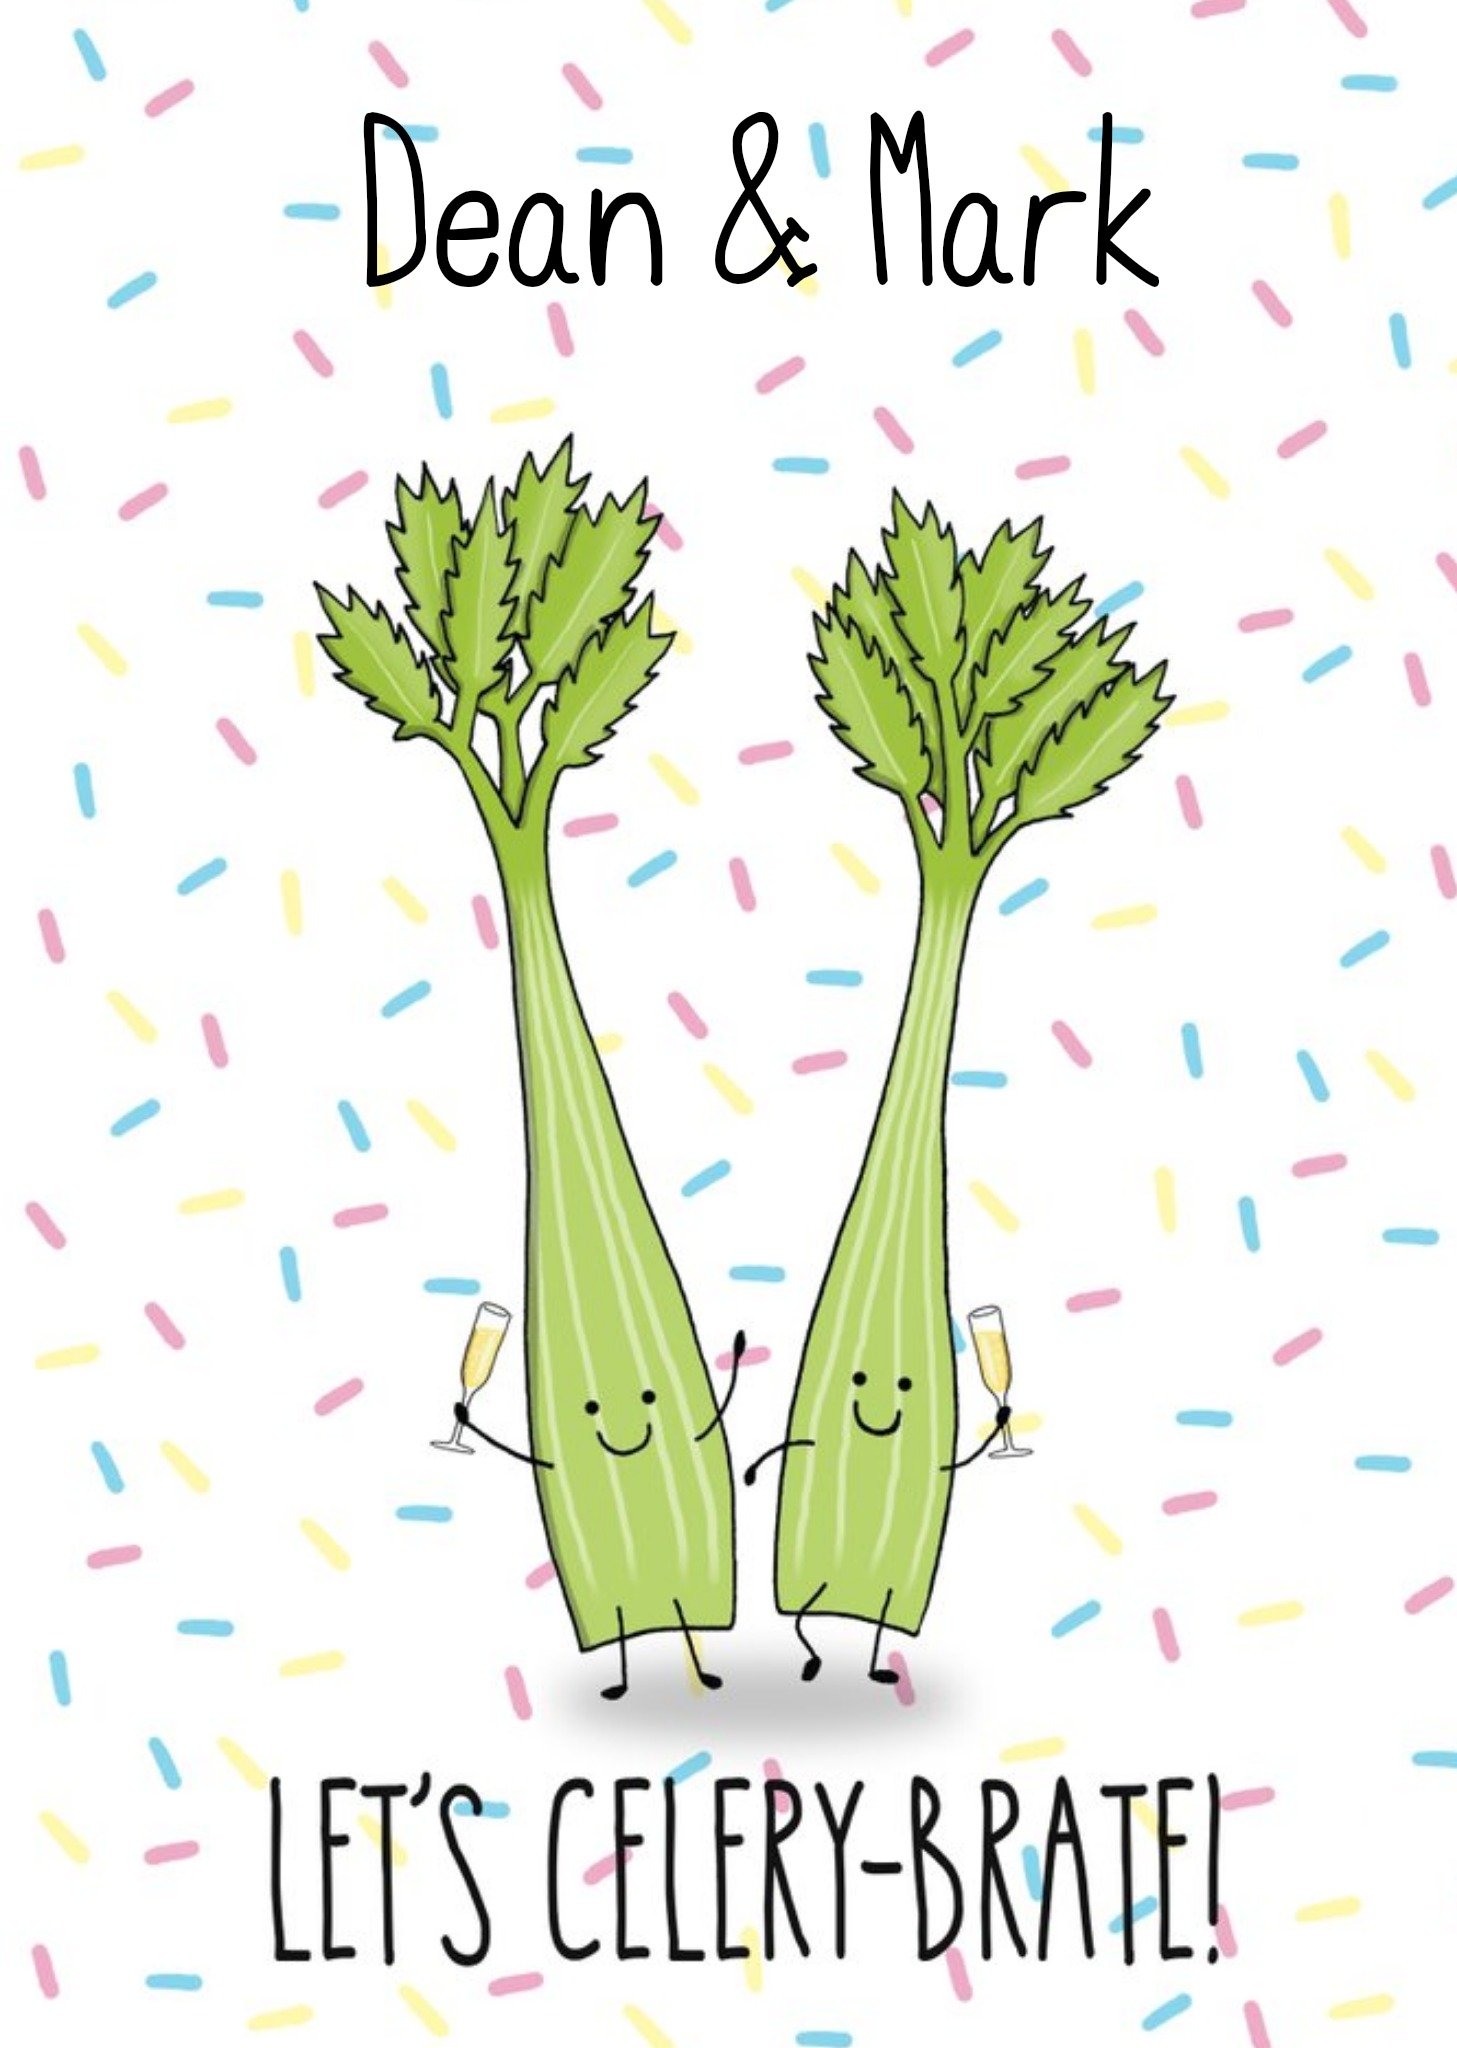 Moonpig Illustration Two Pieces Of Celery. Let's Celery-Brate Congratulations Card Ecard